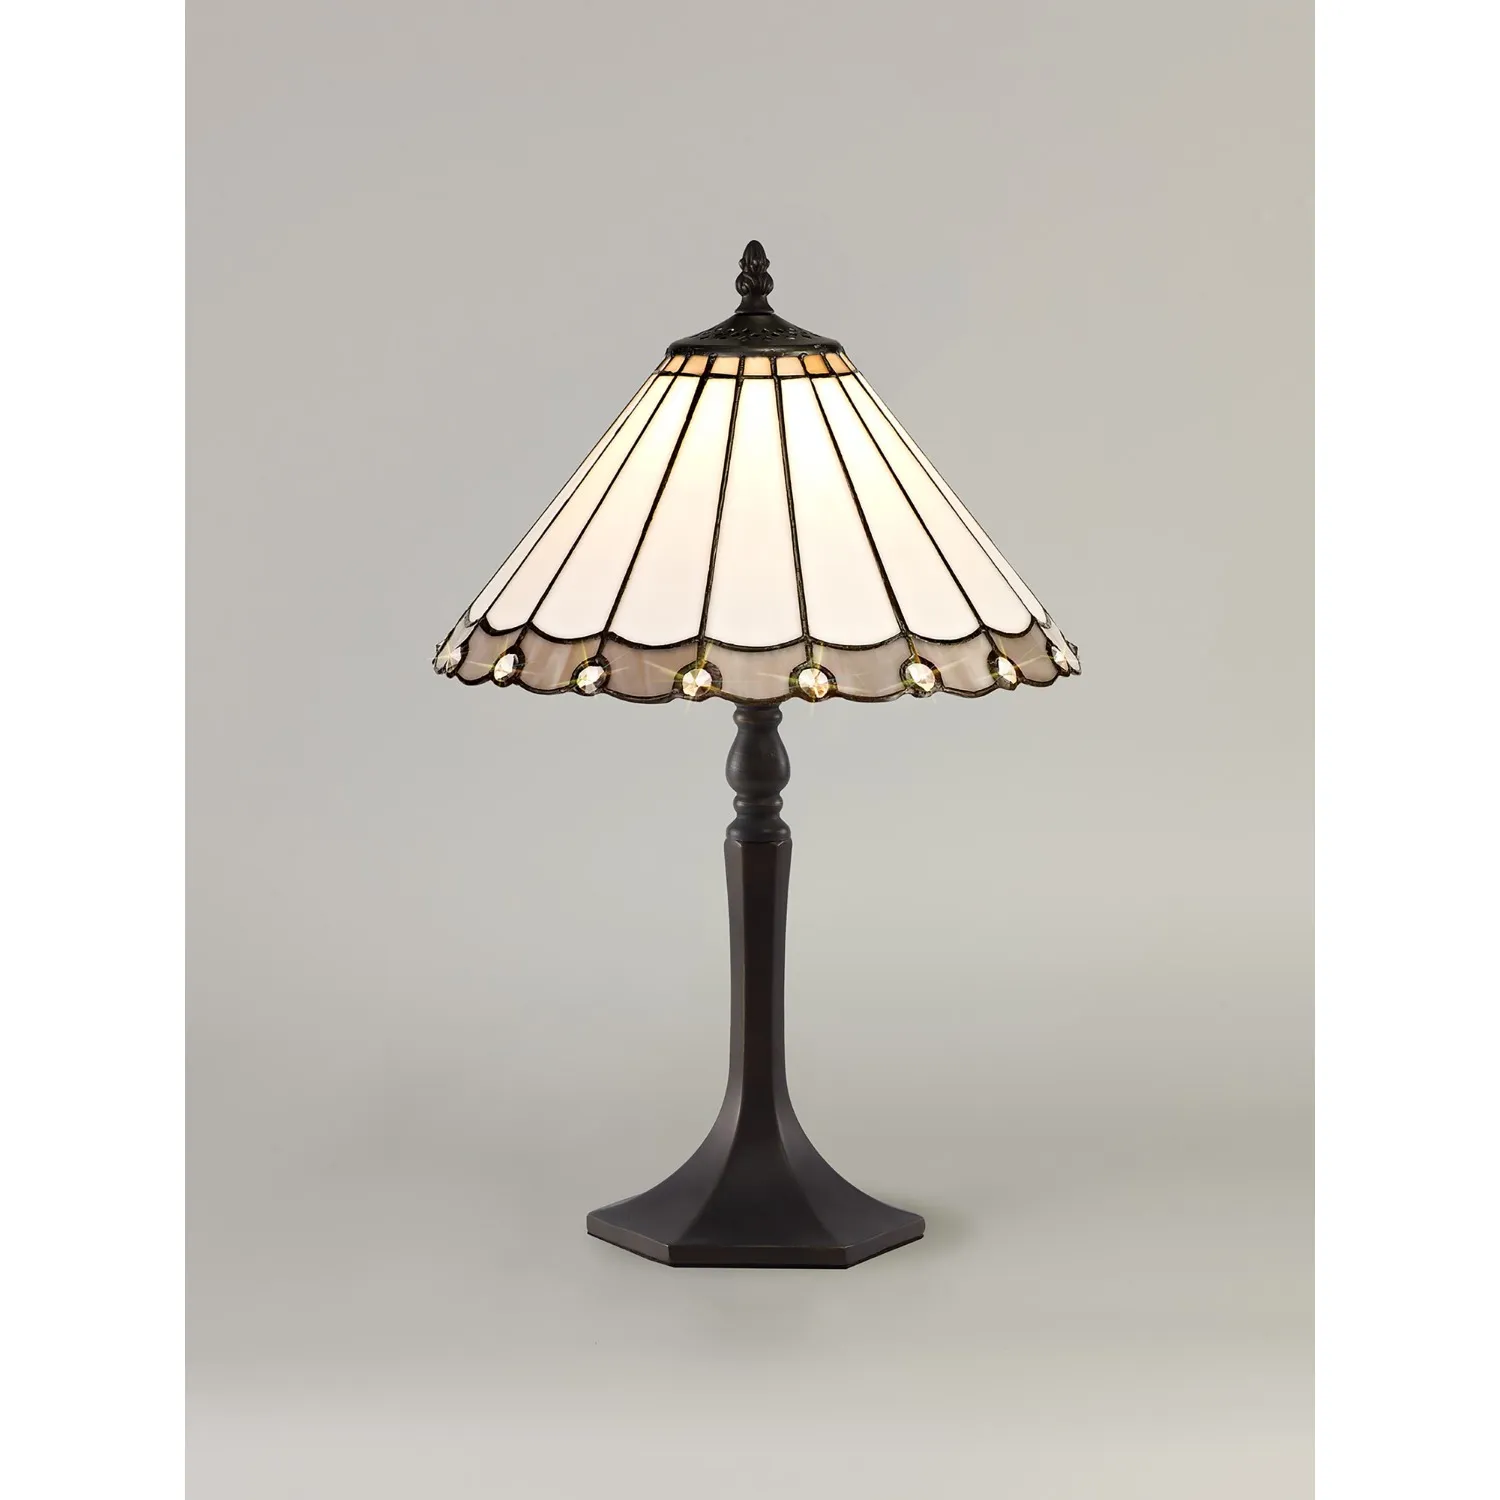 Ware 1 Light Octagonal Table Lamp E27 With 30cm Tiffany Shade, Grey Cream Crystal Aged Antique Brass